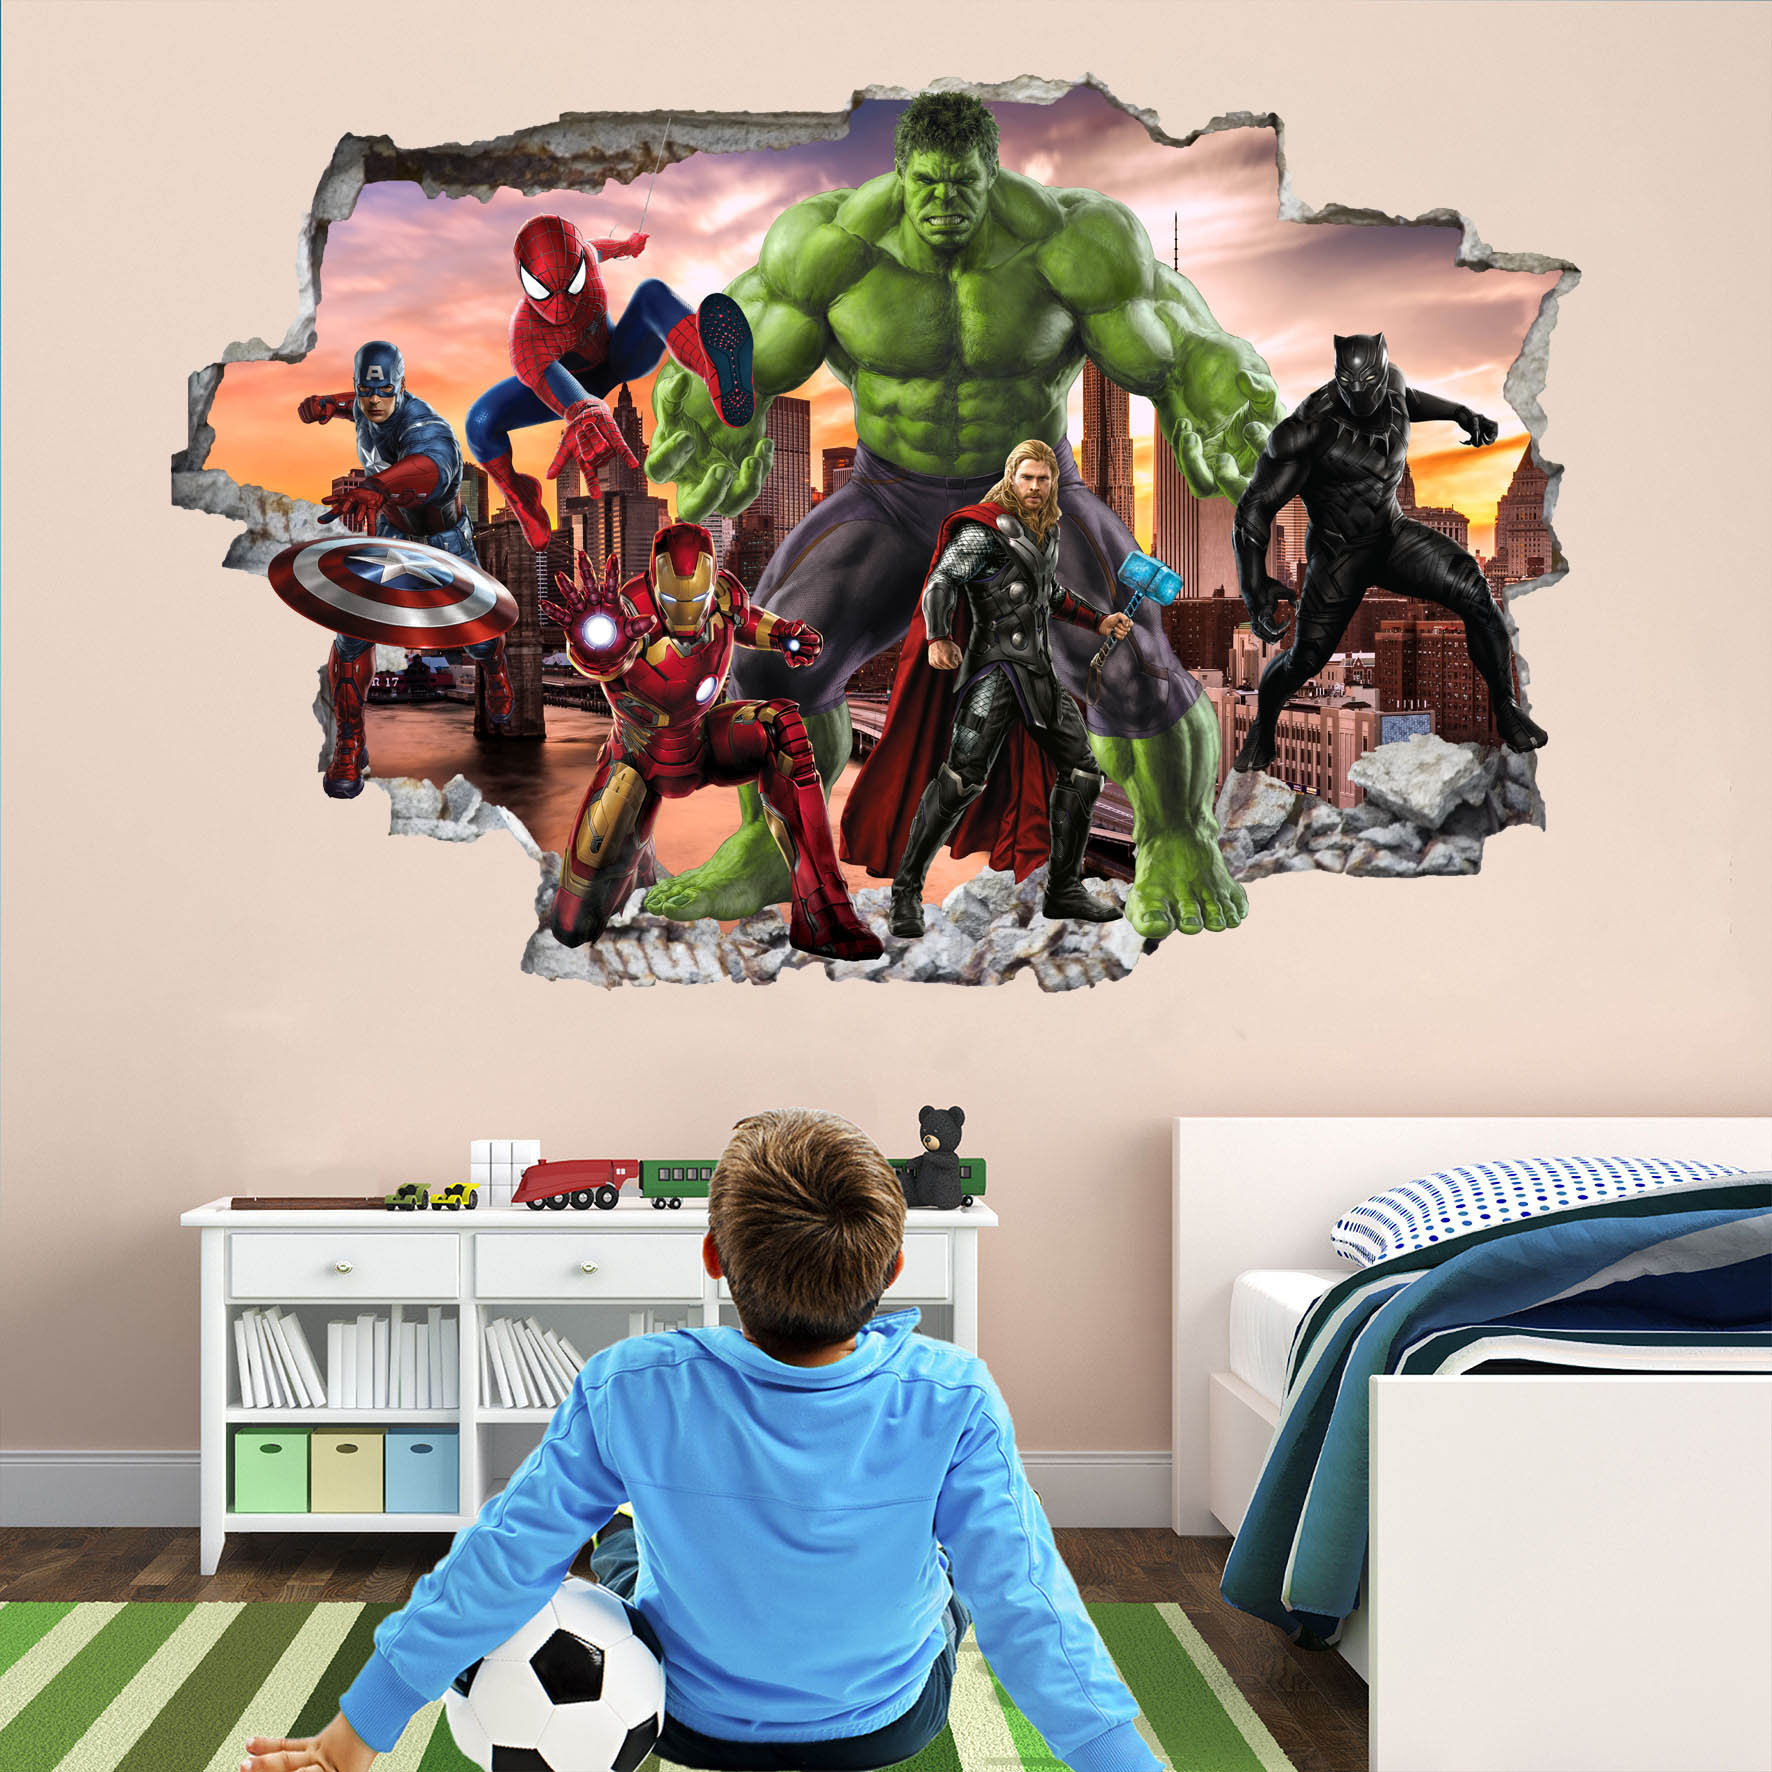 3D Avengers Endgame Wall Stickers Superheros Wall Decals for Kids Bedroom Mural Room Gaming Art Vinyl Wall Decor Sticker 